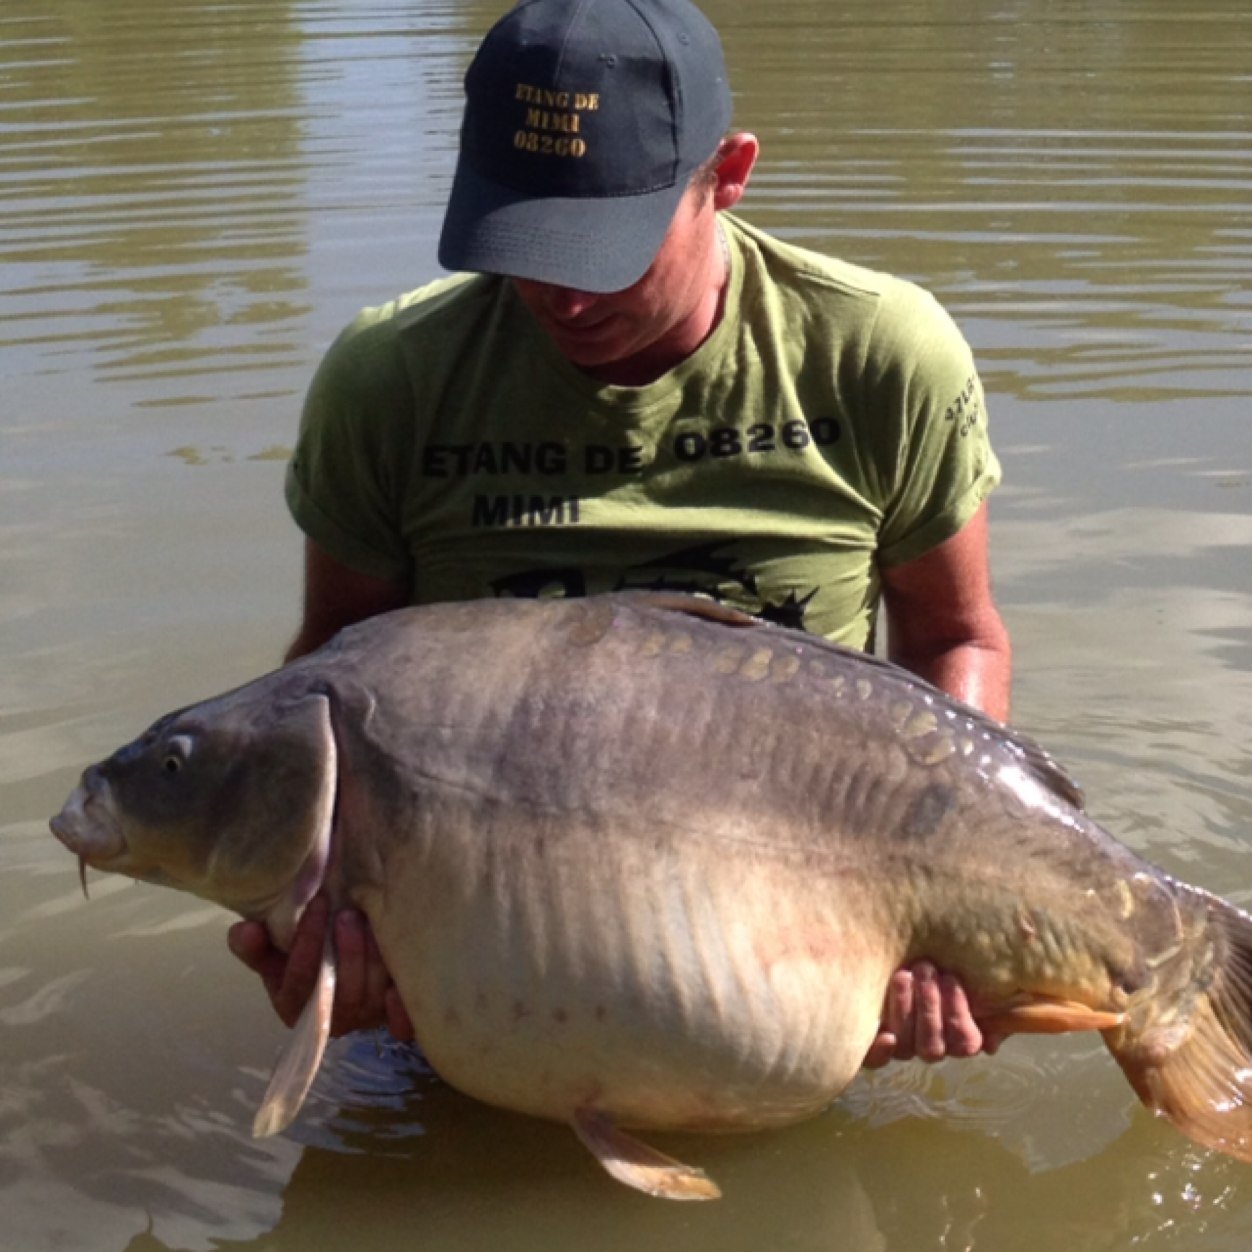 ETANG DE MIMI - French Carp Fishery - NOW BOOKING 2020/21 🐟Carp to 50lb+ 🏠Exclusive Lodge and Shower Facilities 🚘3hrs from Calais.